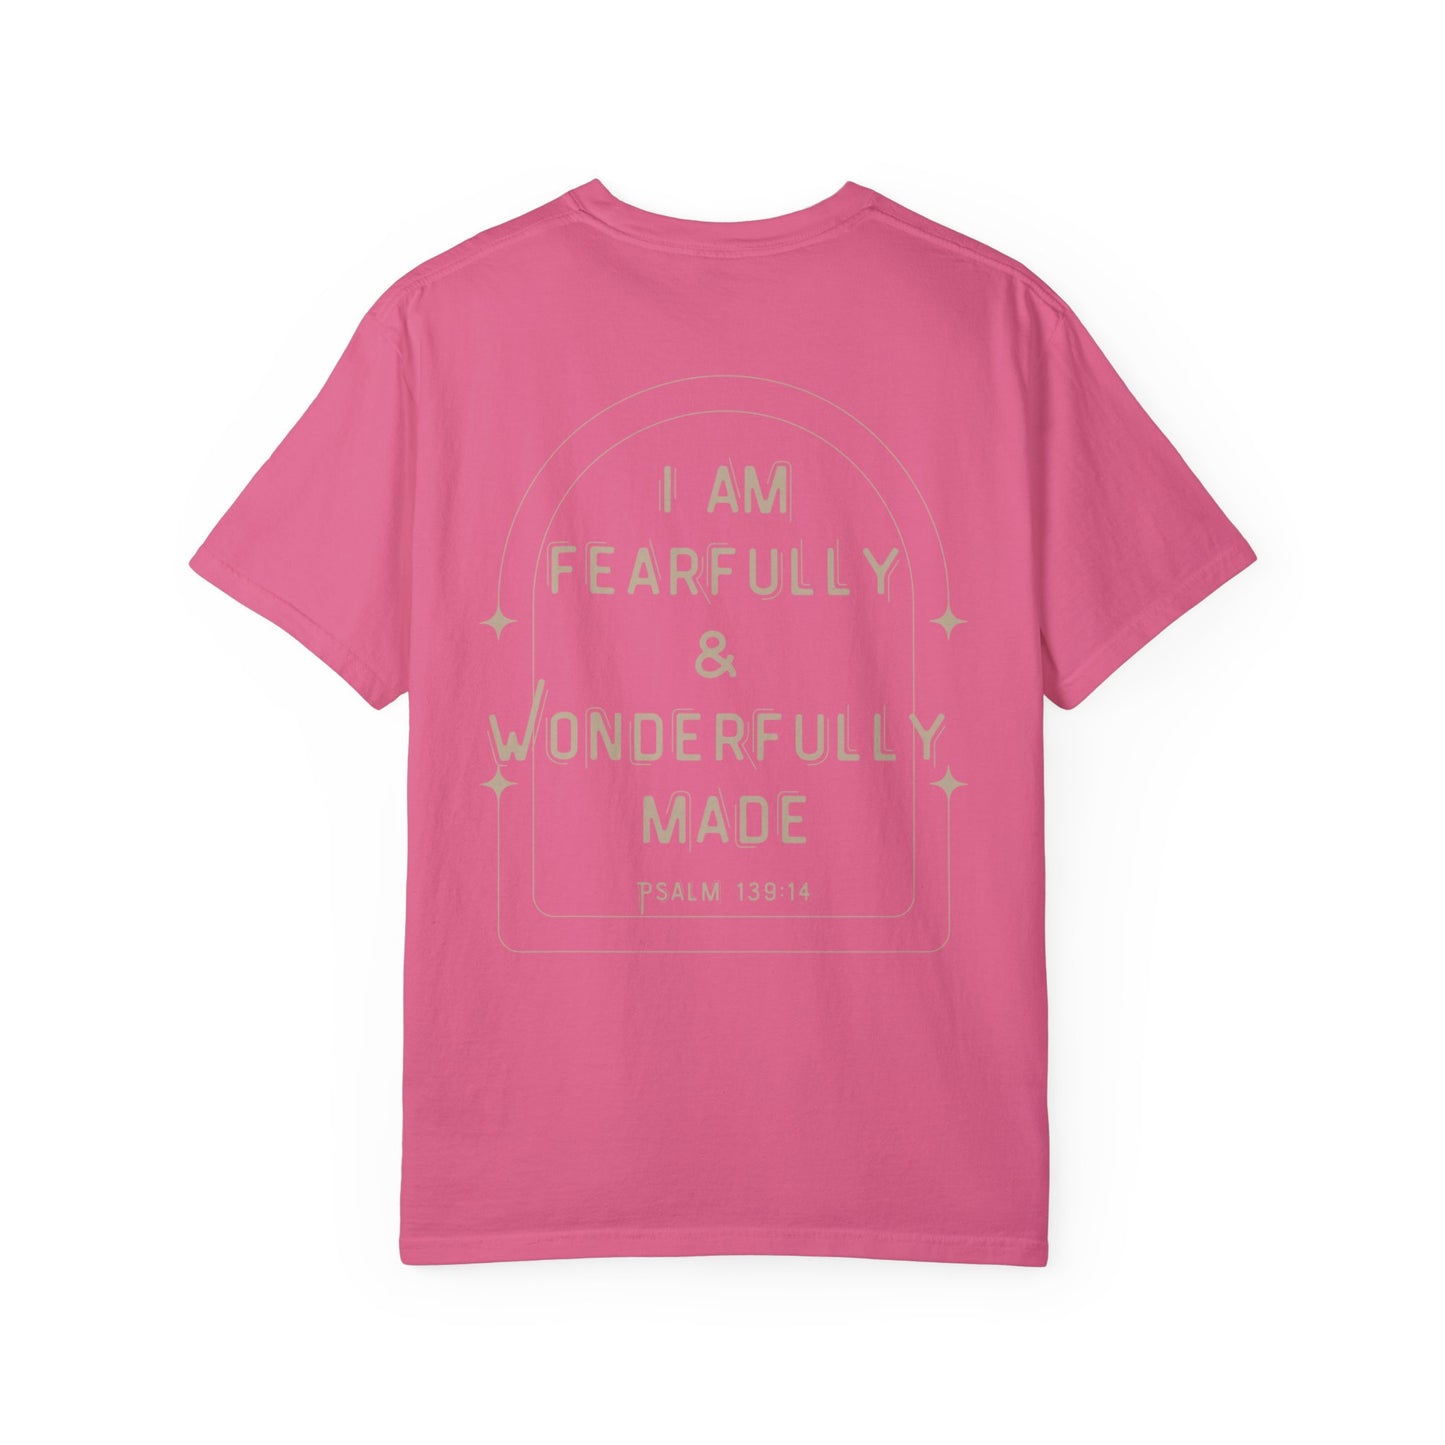 I am Fearfully and Wonderfully Made Psalm 139:14 Bible Verse Quote Christian Shirt Gift for Him Her Friend Father's Day Valentine's Day